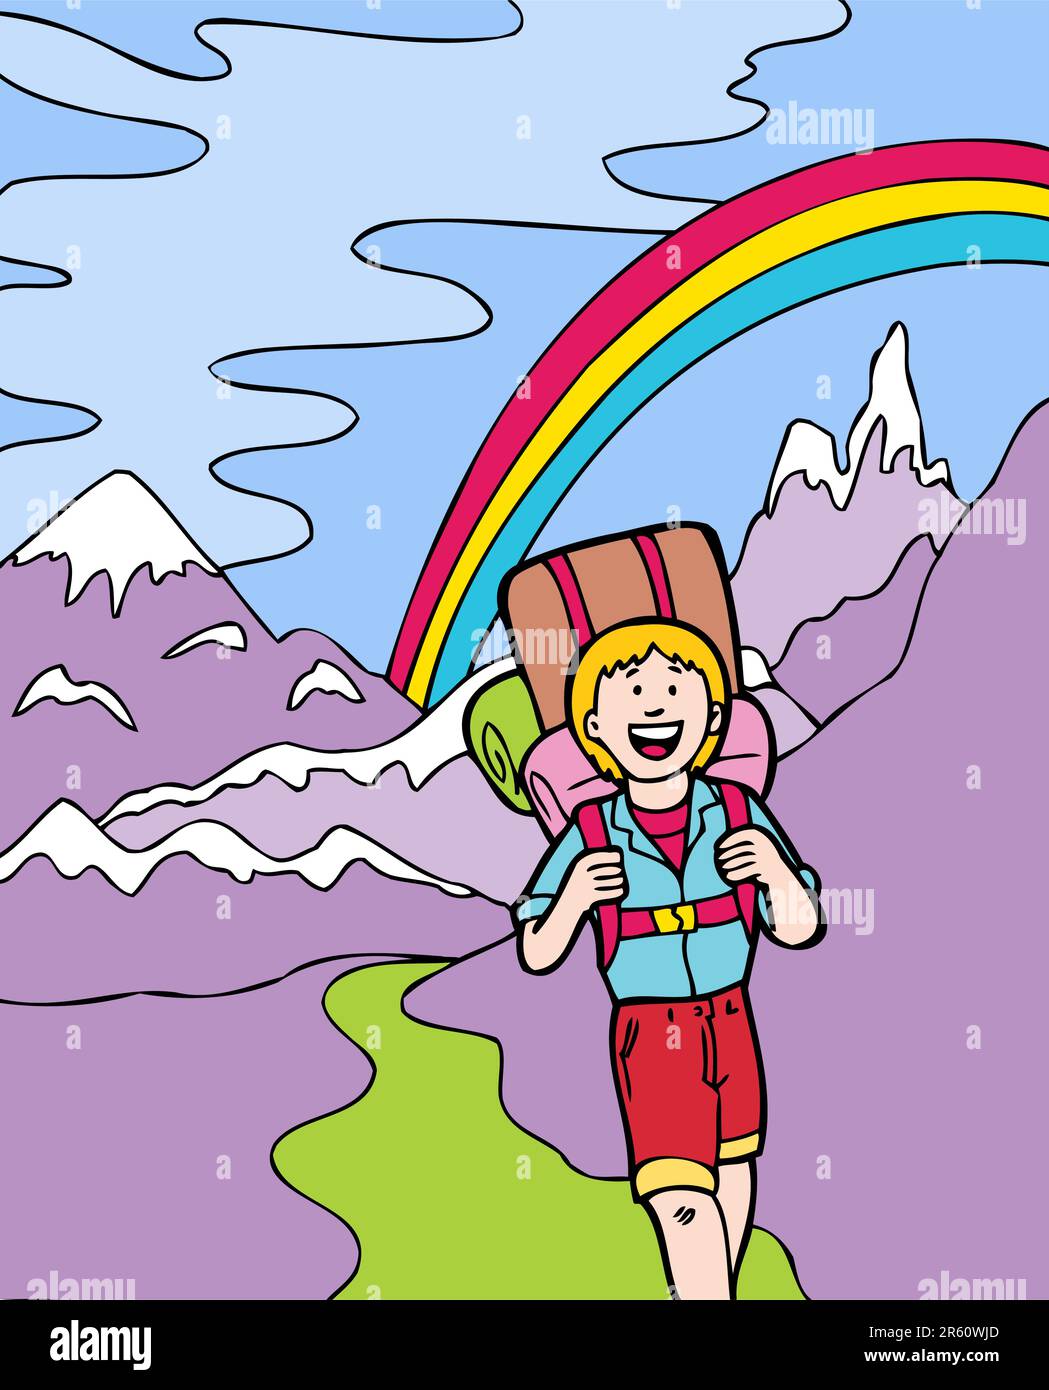 Young child is backpacking across a mountain trail. A rainbow appears in the sky. Stock Vector